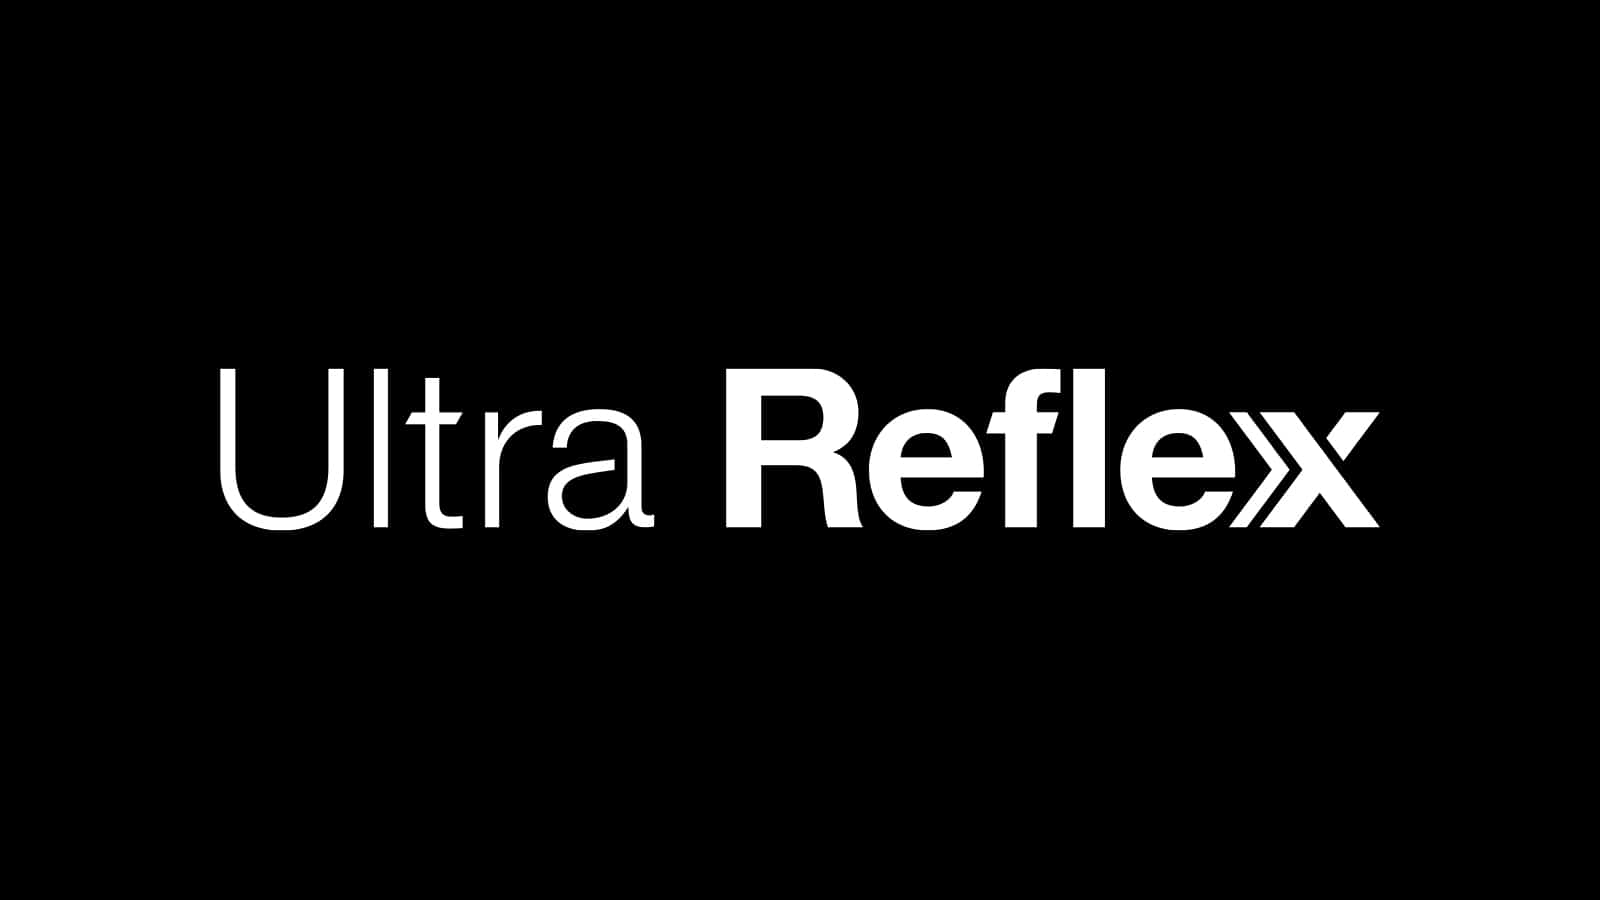 Meyer Sound Ultra Reflex Solution Delivers Superior Fidelity and Precise Imaging for Screen Channels on Direct View Displays